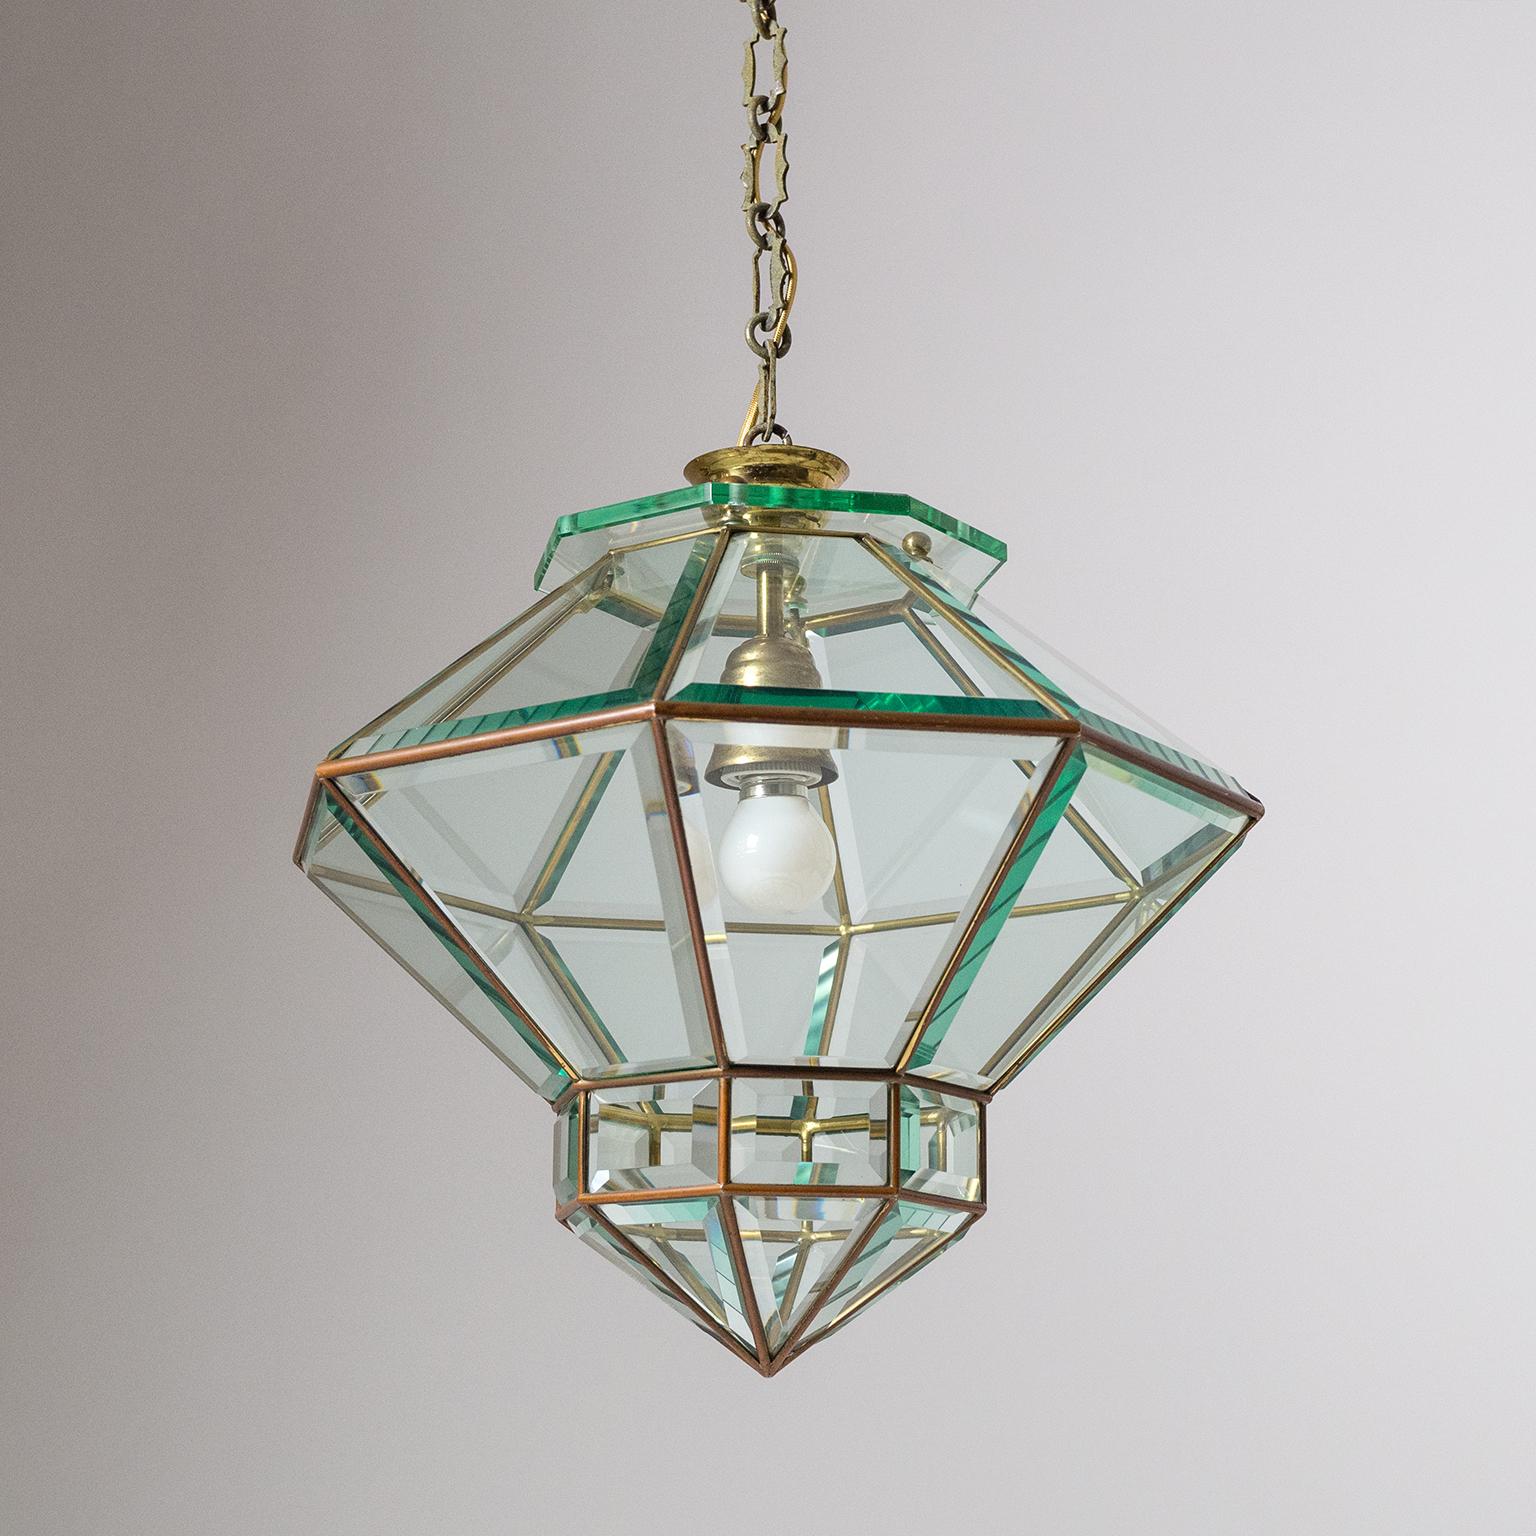 Italian 1940s Lantern, Faceted Glass and Brass (Art déco)